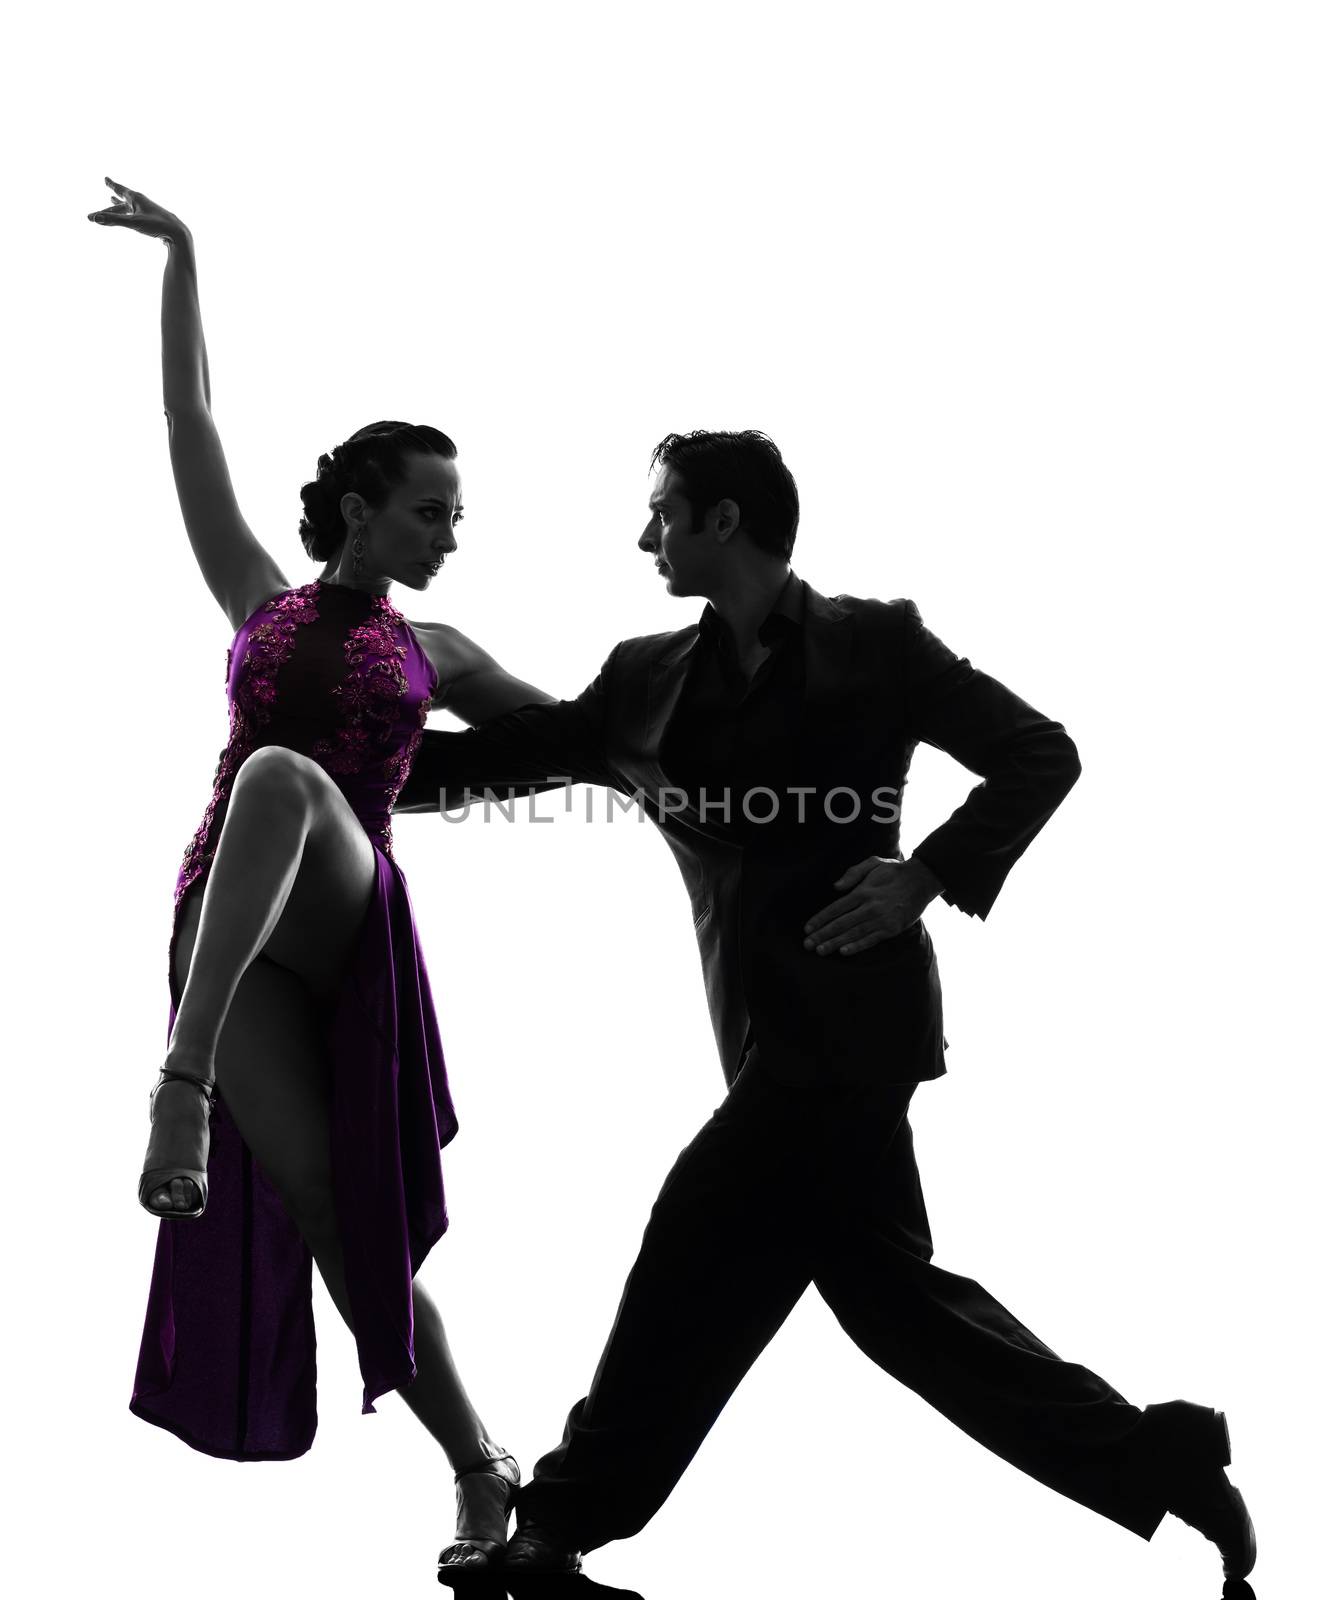 one caucasian couple man woman ballroom dancers tangoing  in silhouette studio isolated on white background